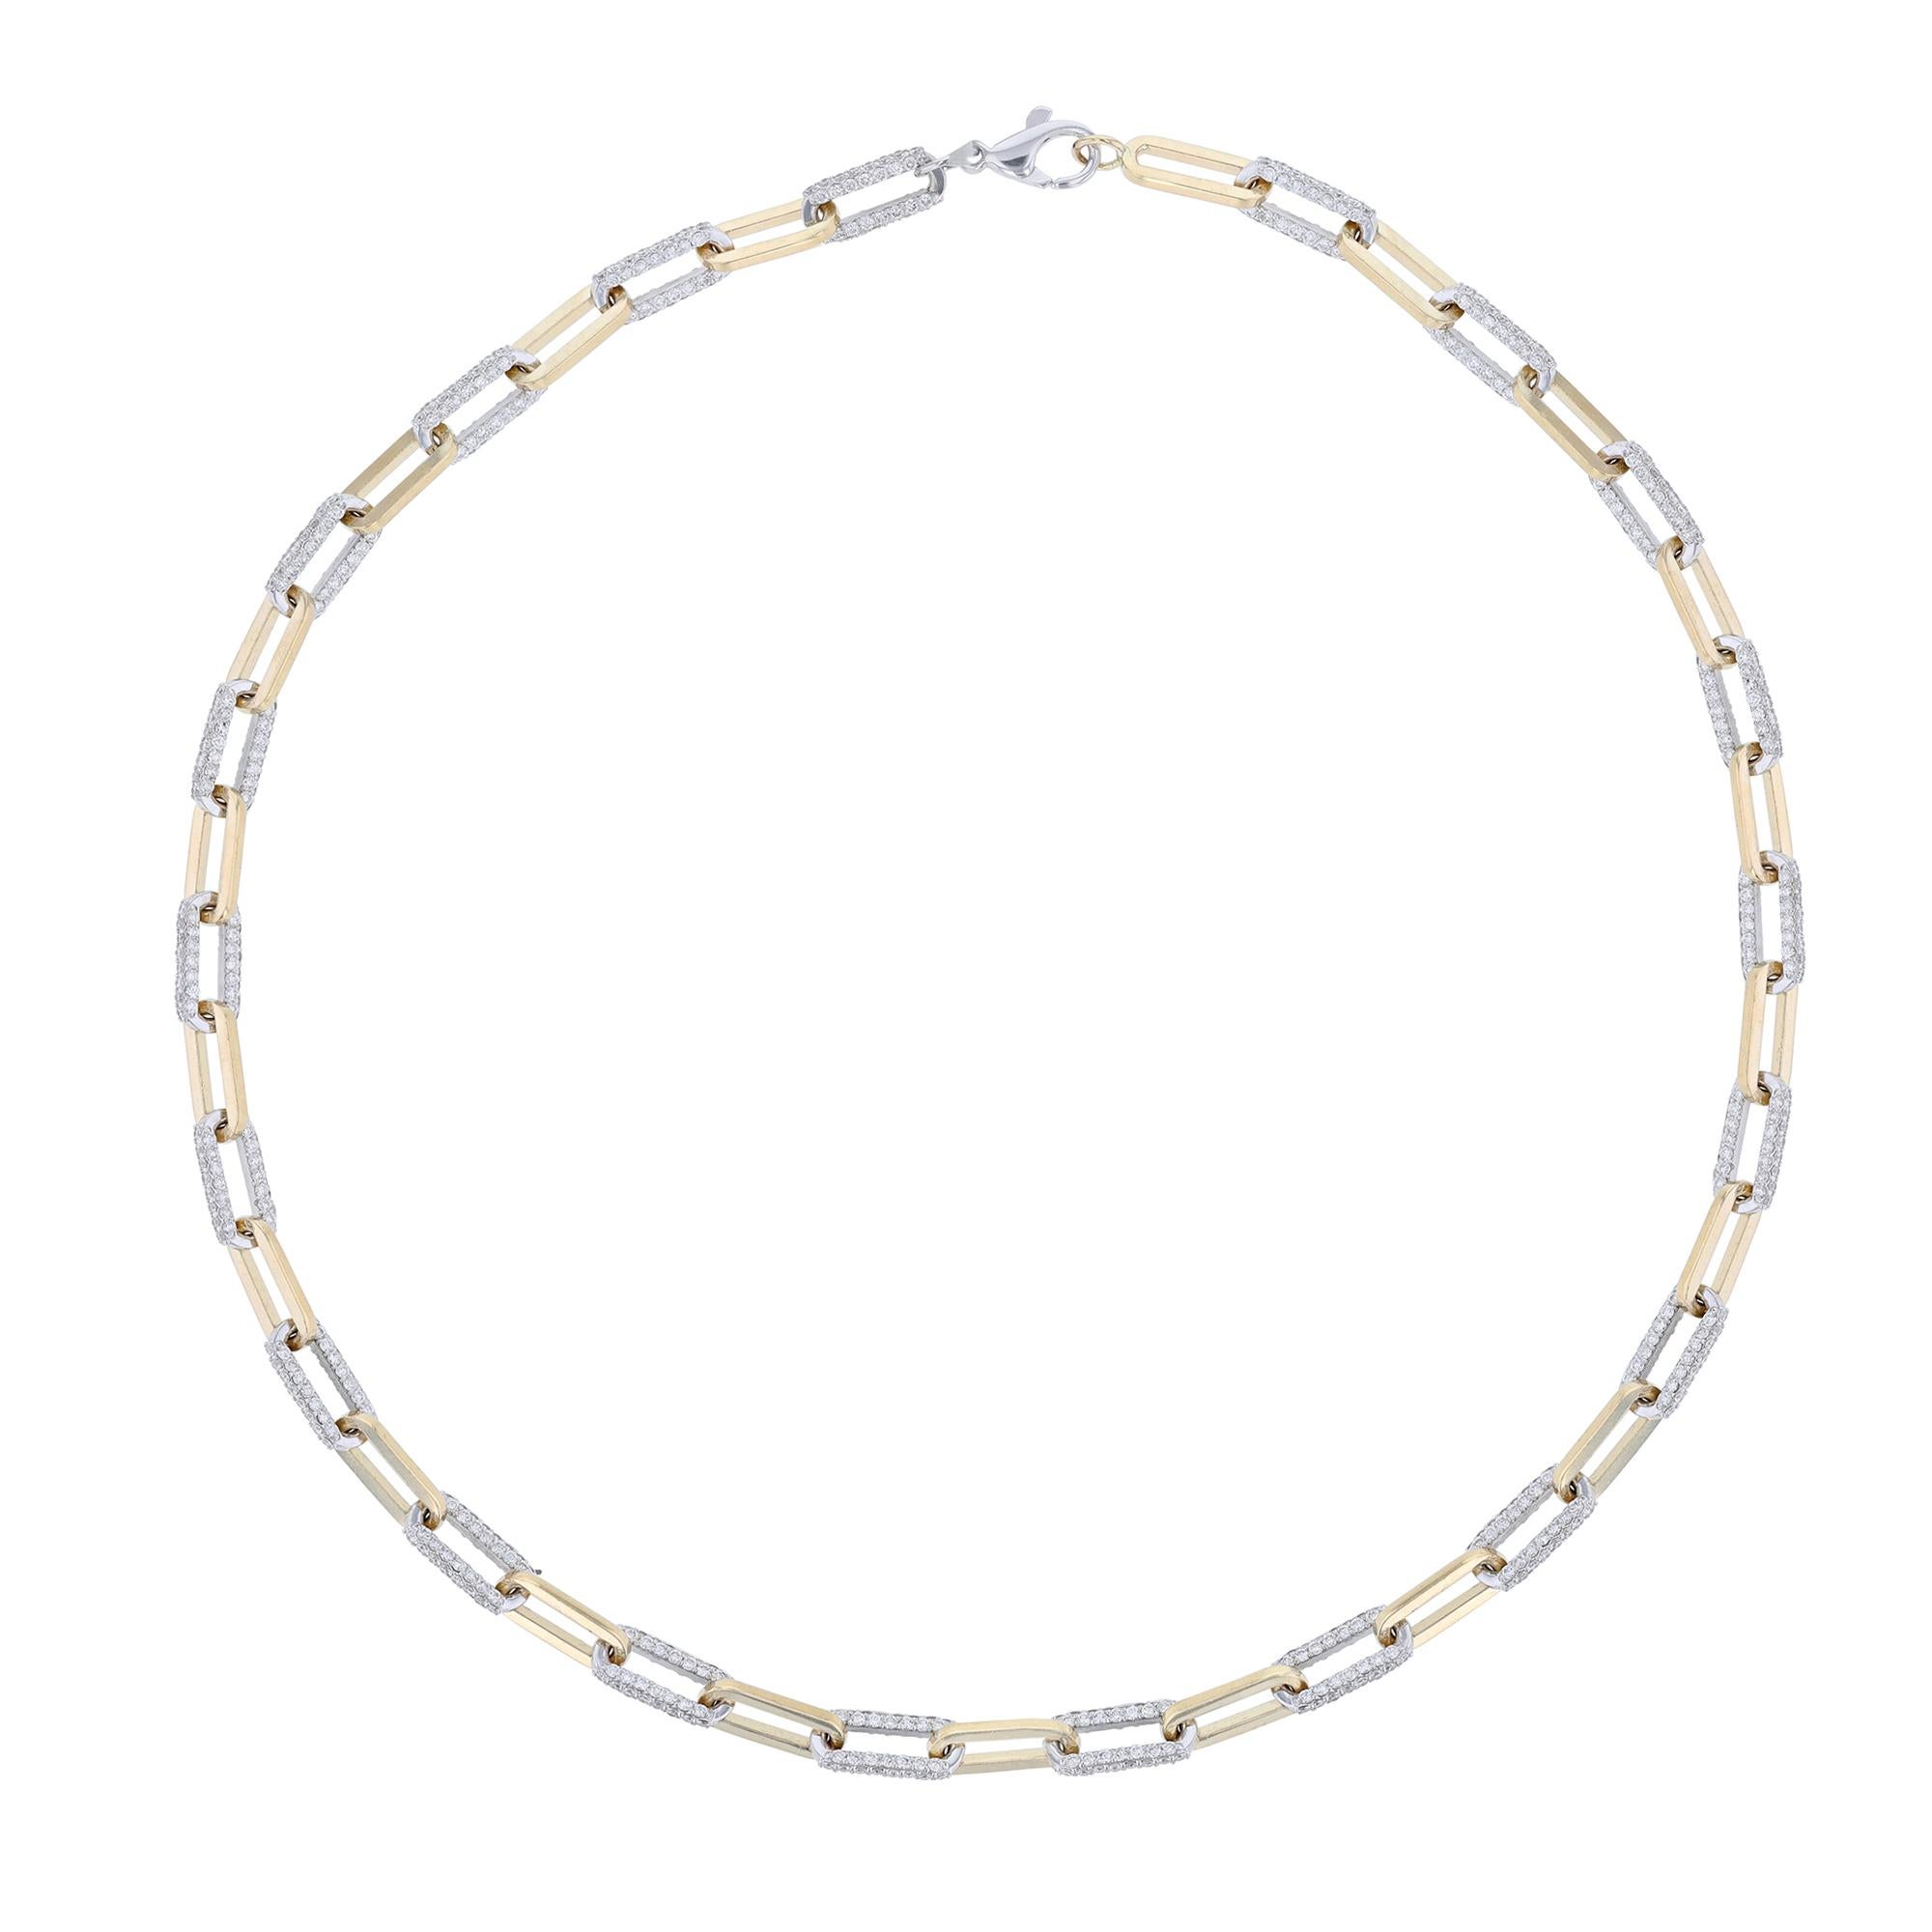 This paperclip necklace necklace is made in 14K yellow and white gold. It features 924 round cut diamonds weighing 7.80 carats combined. Necklace has a color grade (H) and clarity grade (SI2). Diamonds are prong set.